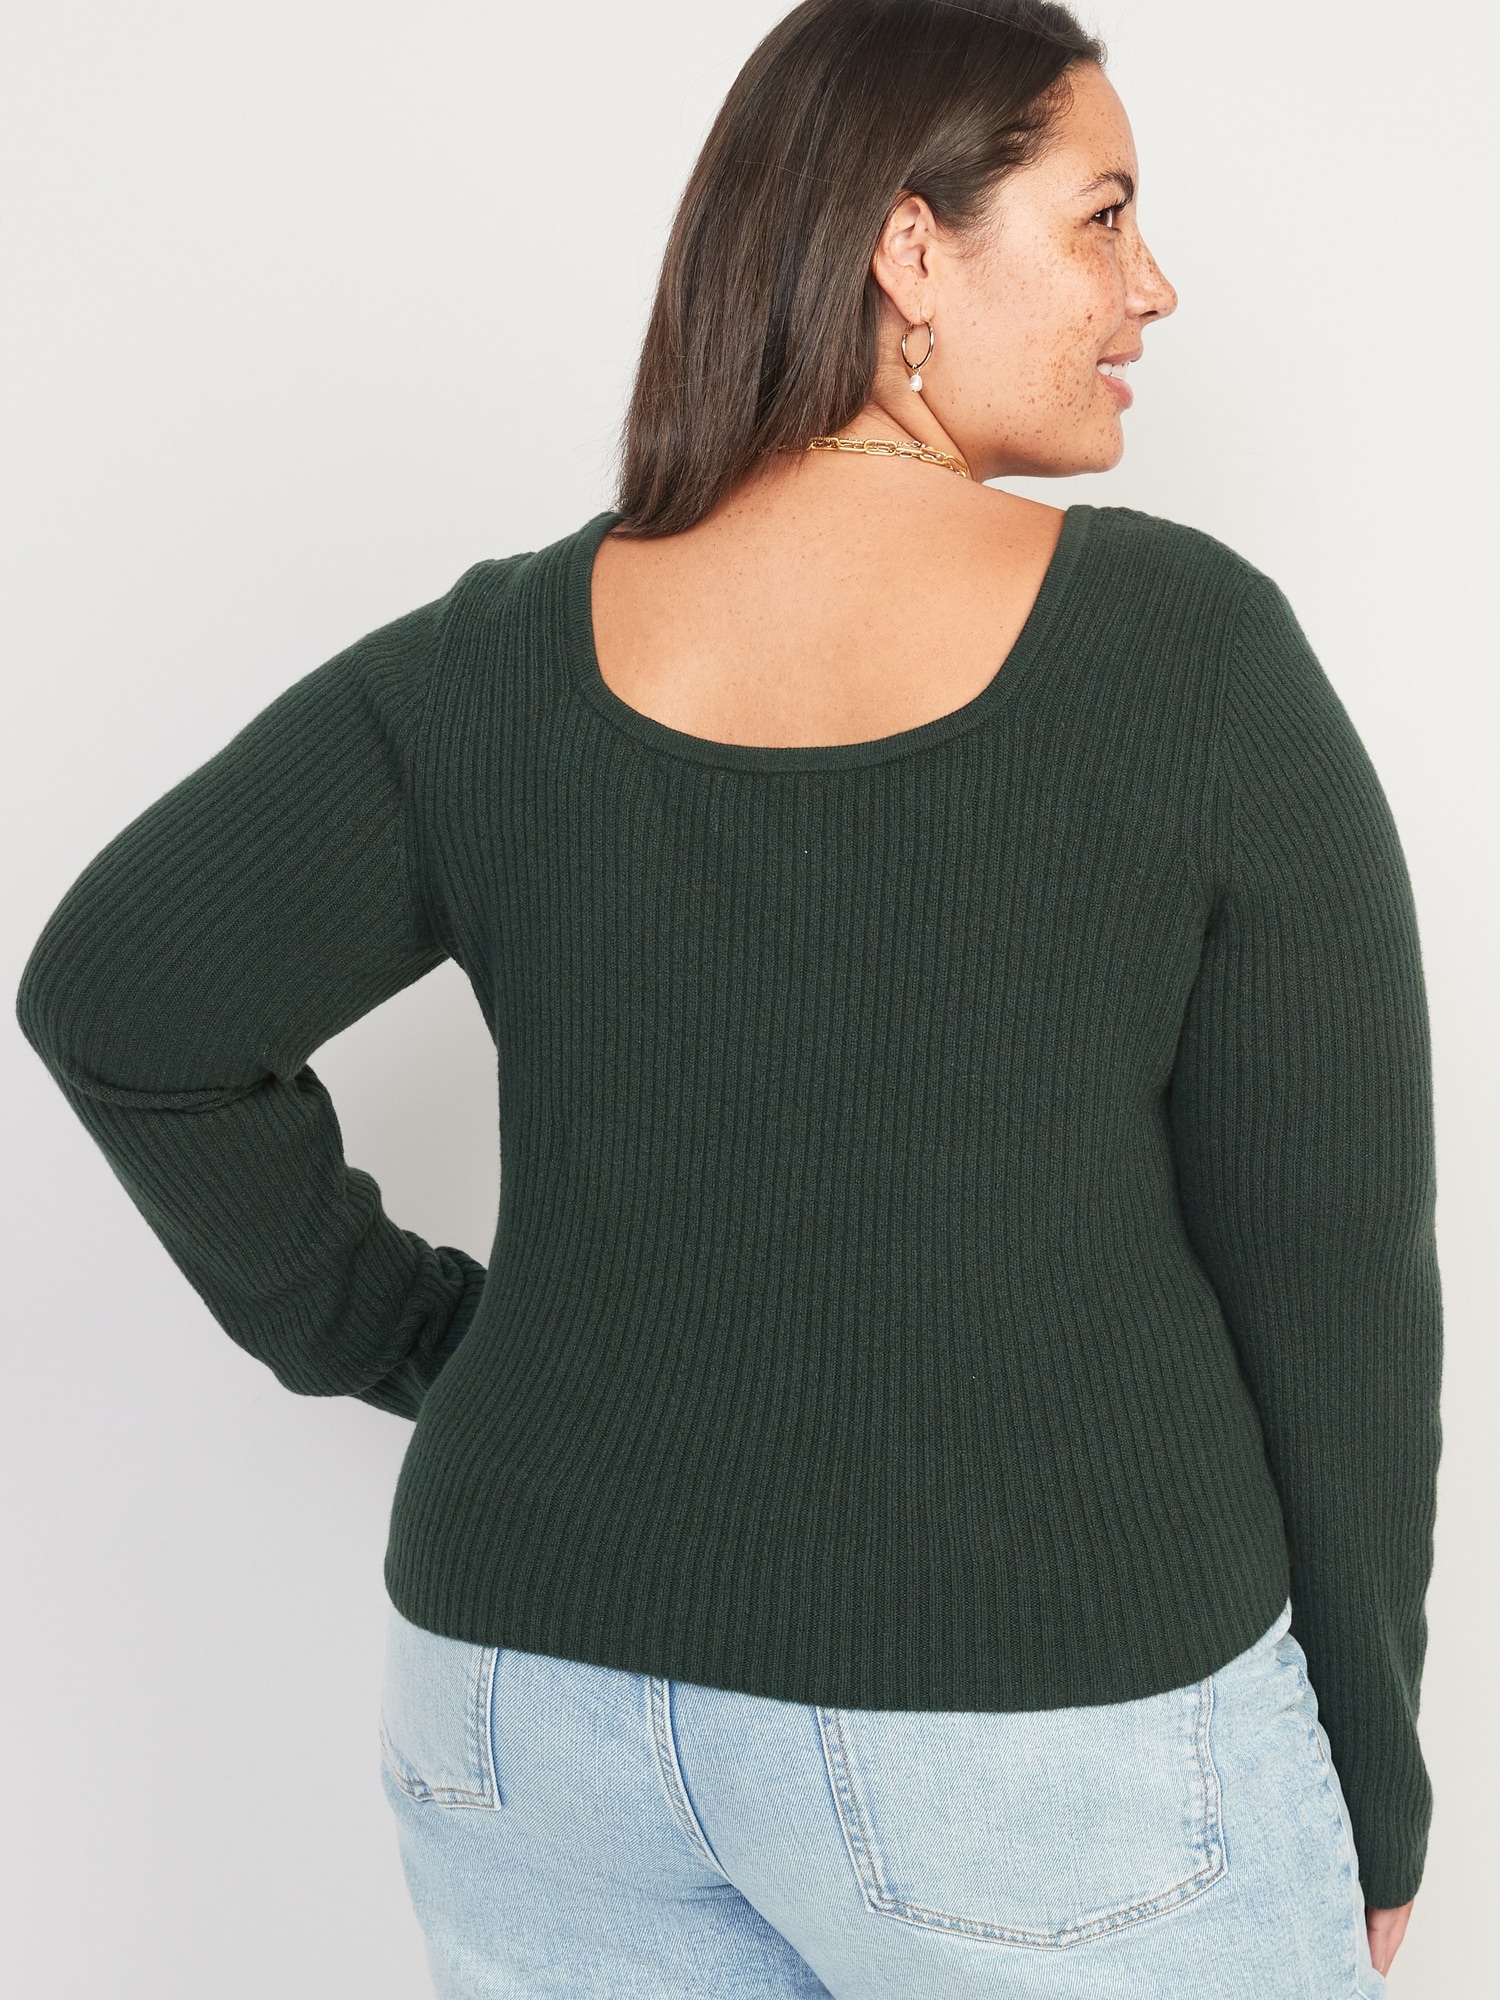 Fitted Cropped Square-Neck Rib-Knit Sweater for Women